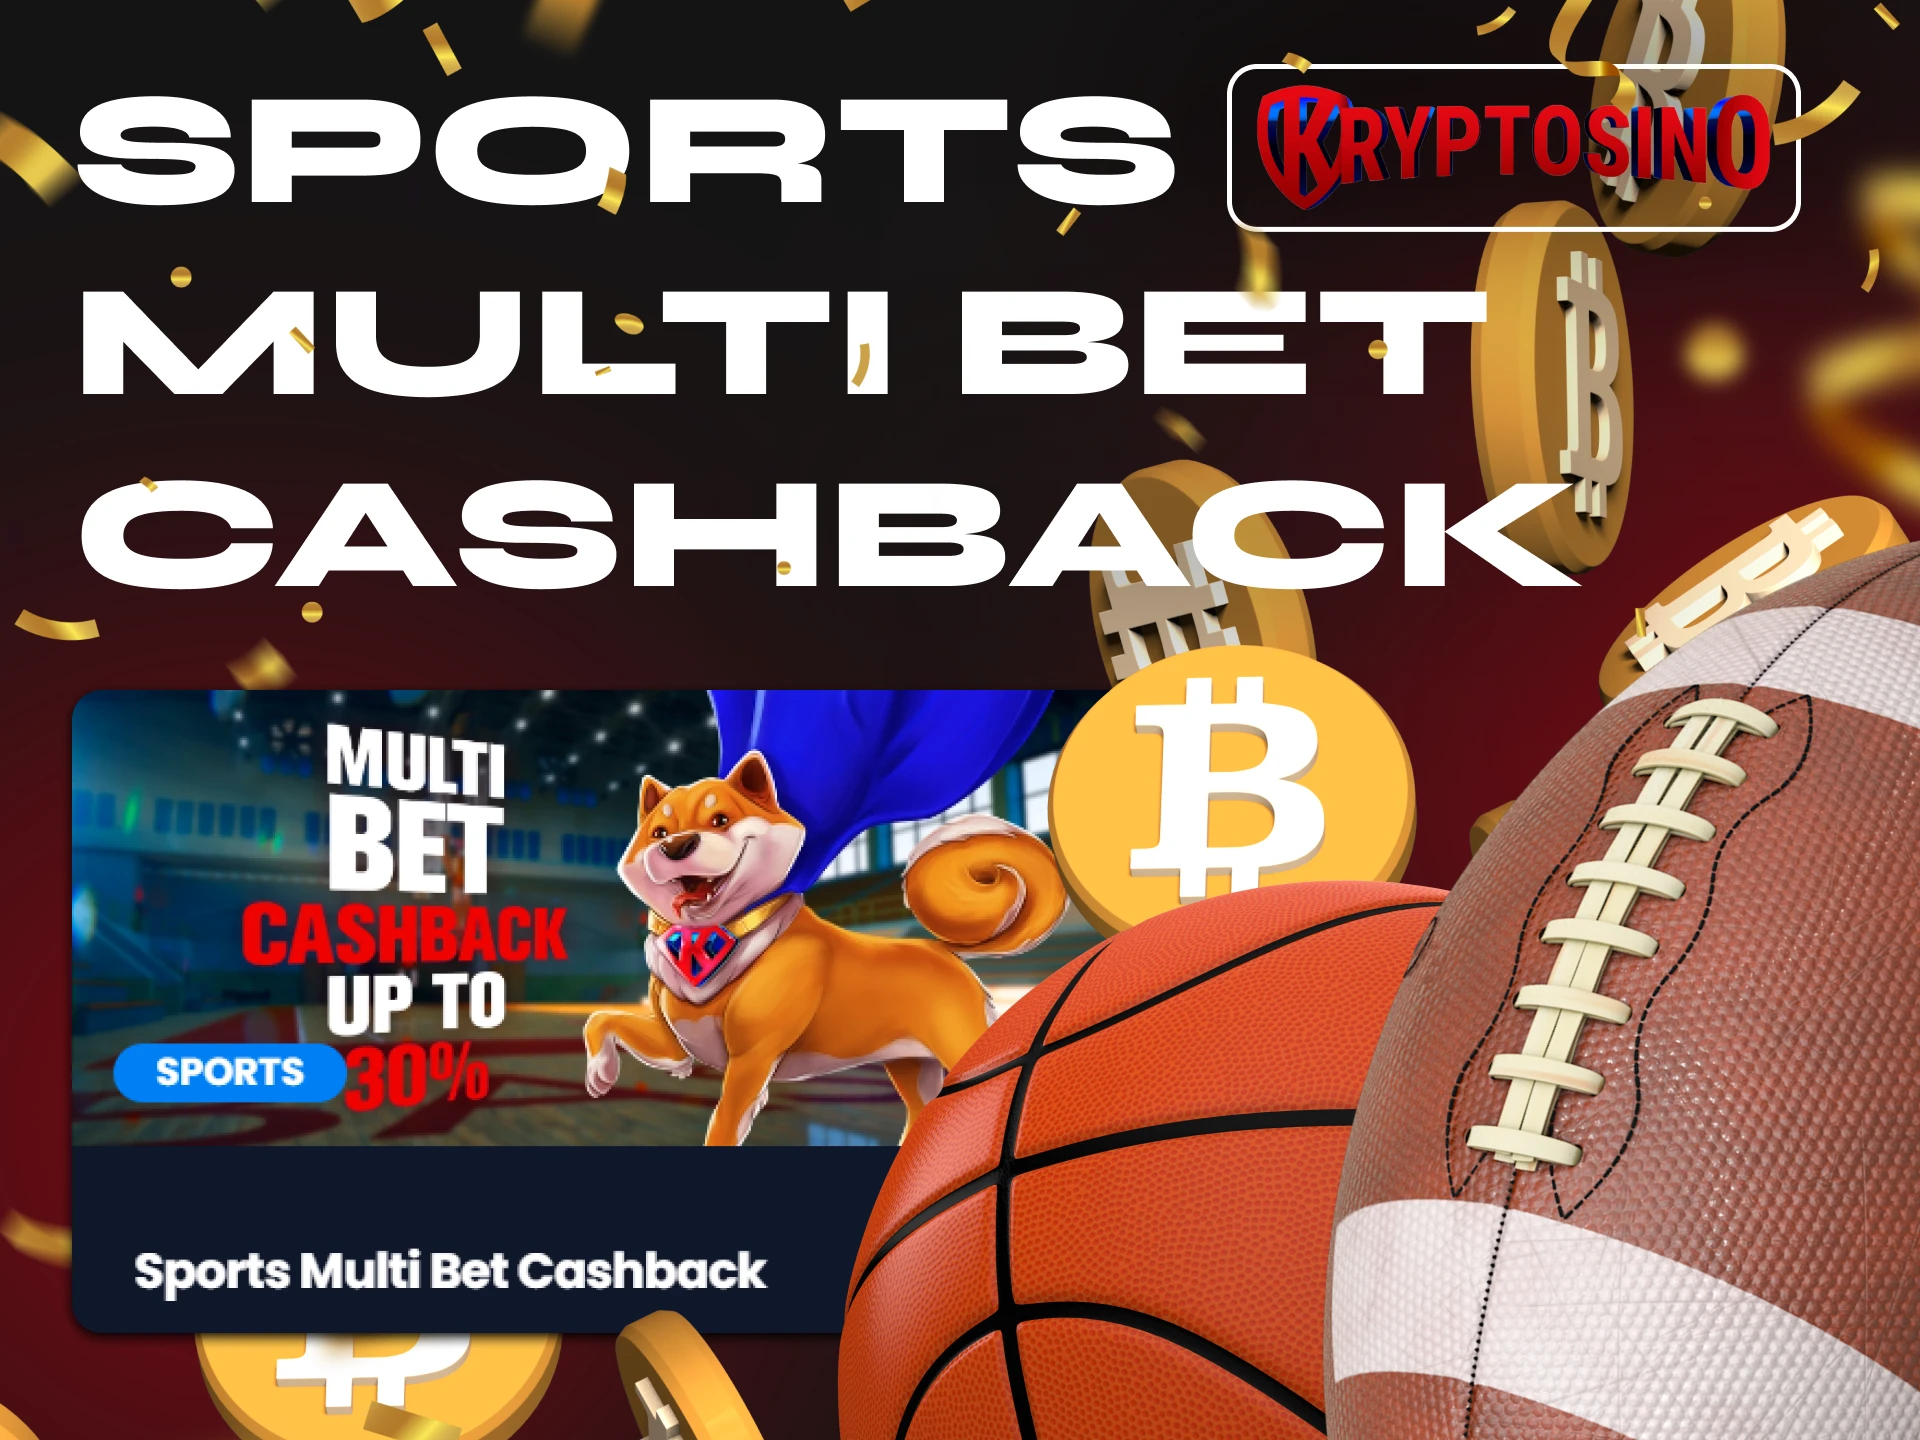 Get cashback on your losses in Sports Betting at Kryptosino Casino.